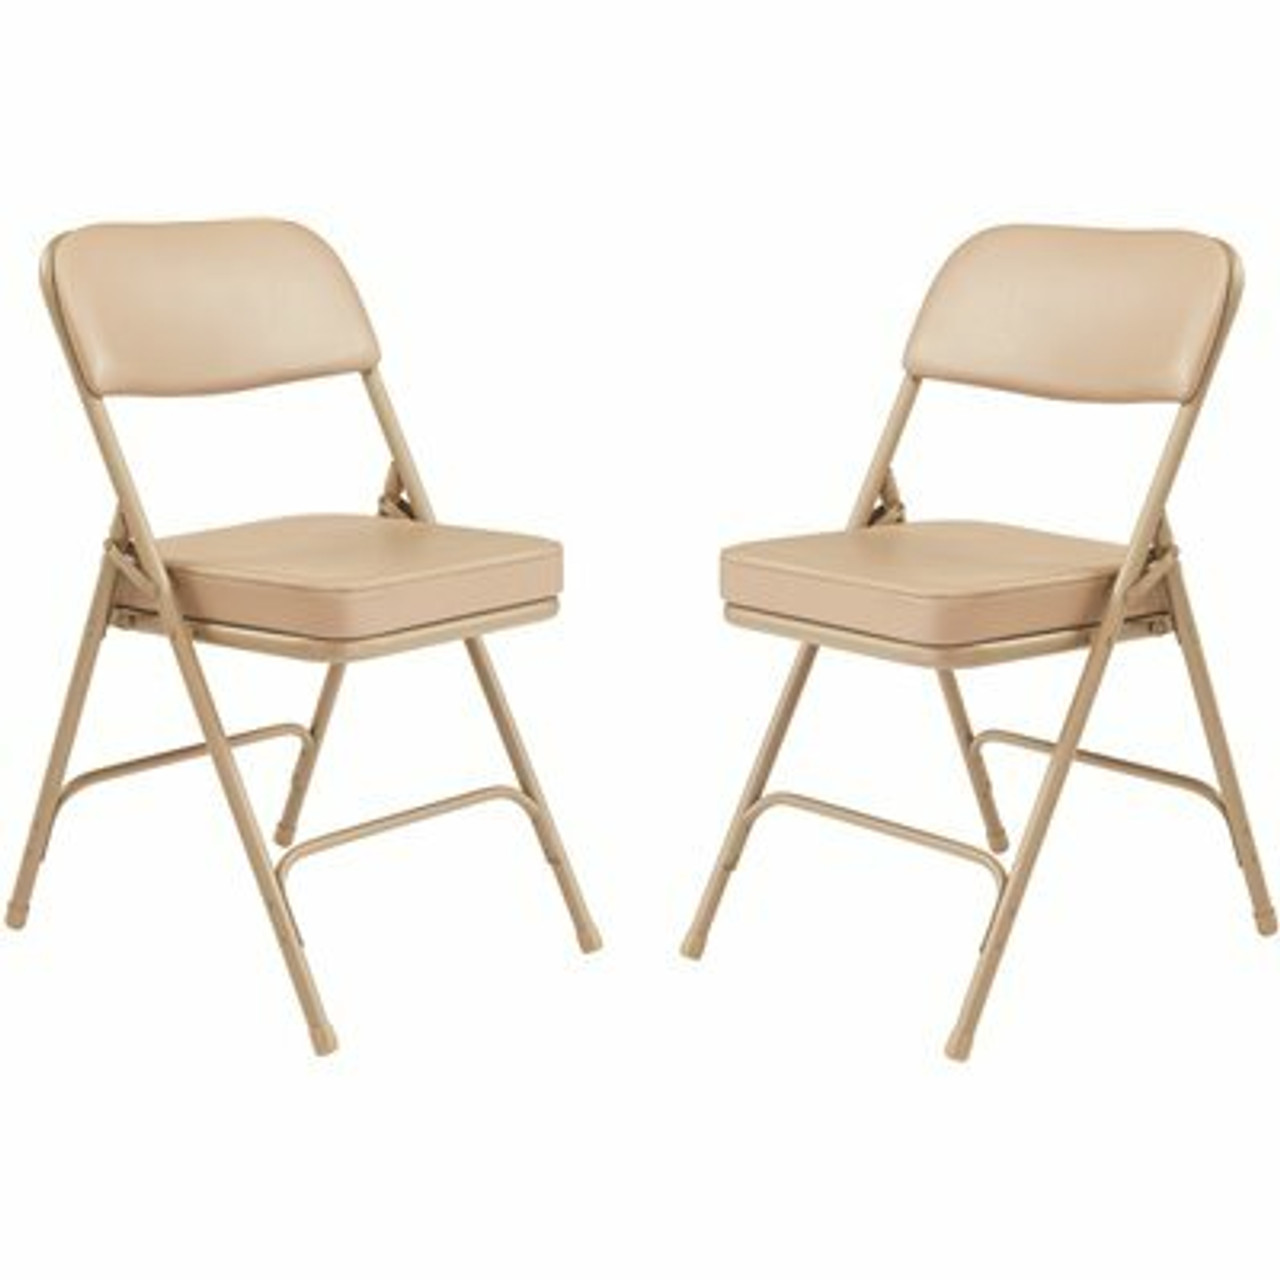 National Public Seating 3200 Series Premium 2 In. Vinyl Upholstered Double Hinge Folding Chair, Beige (Pack Of 2)